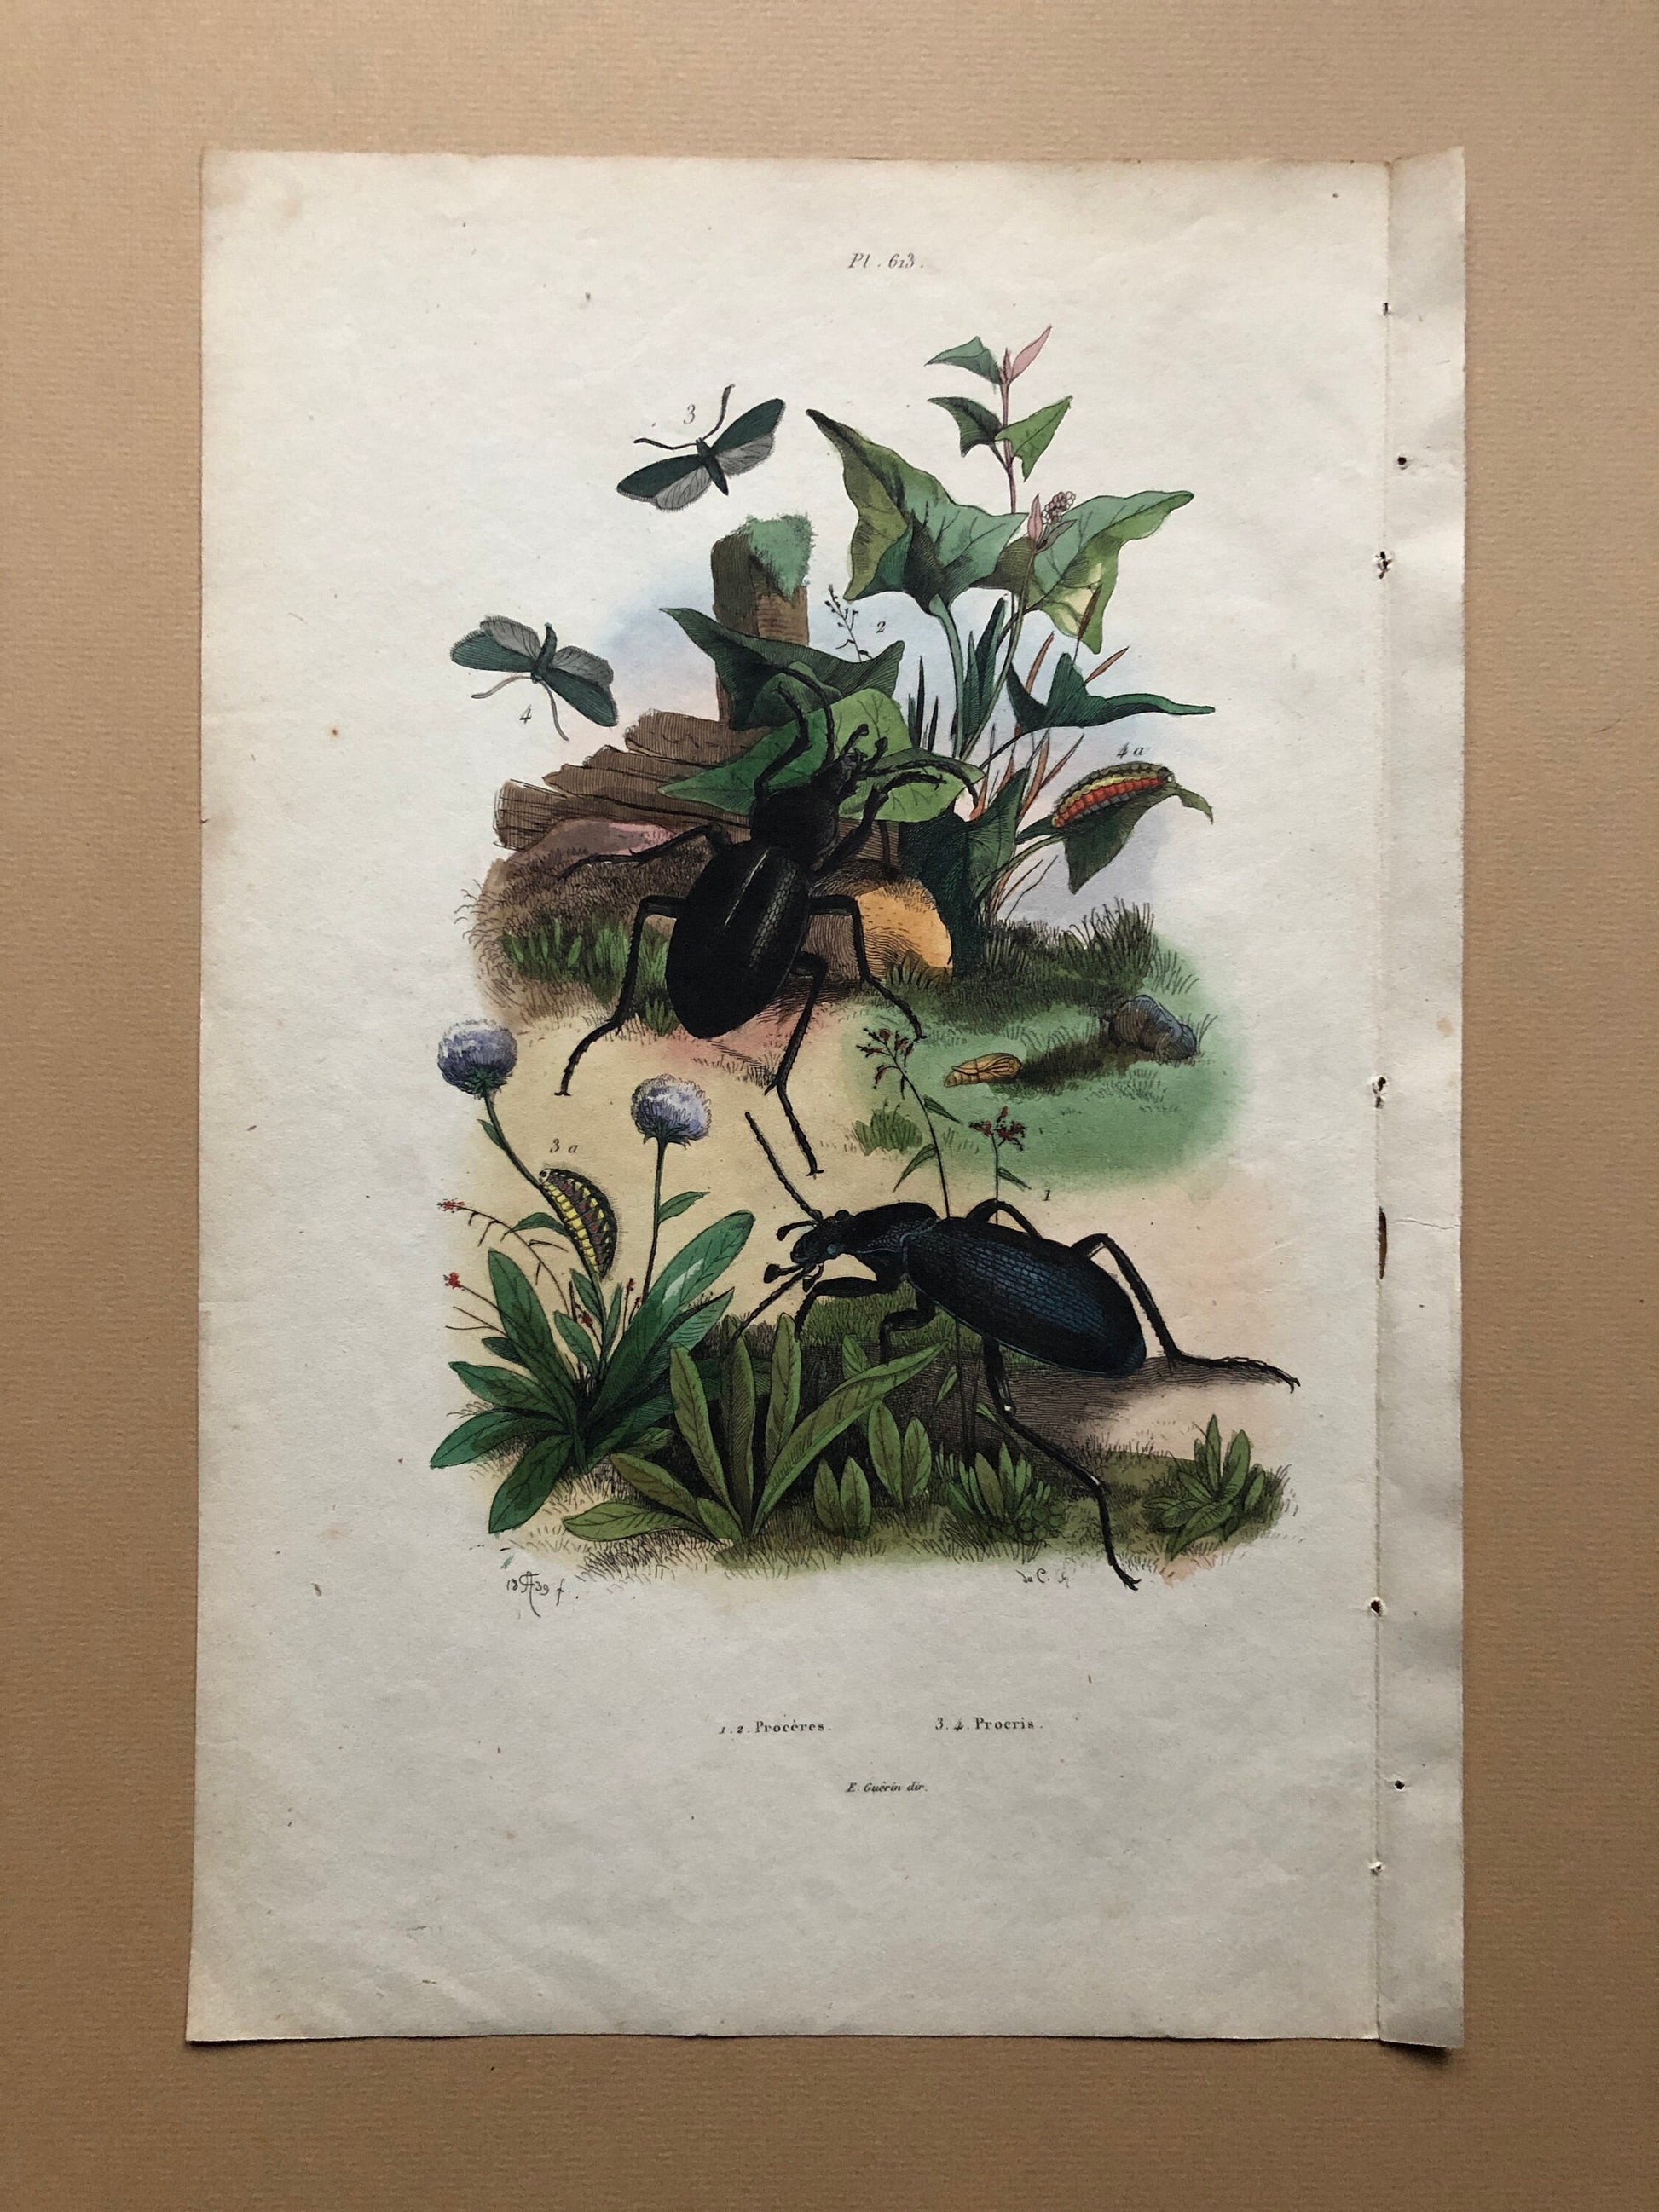 Three Antique Prints (1830s) From a French Dictionary Featuring Beetles, Plants and Other Creatures. Size: 28. X 18 cms.